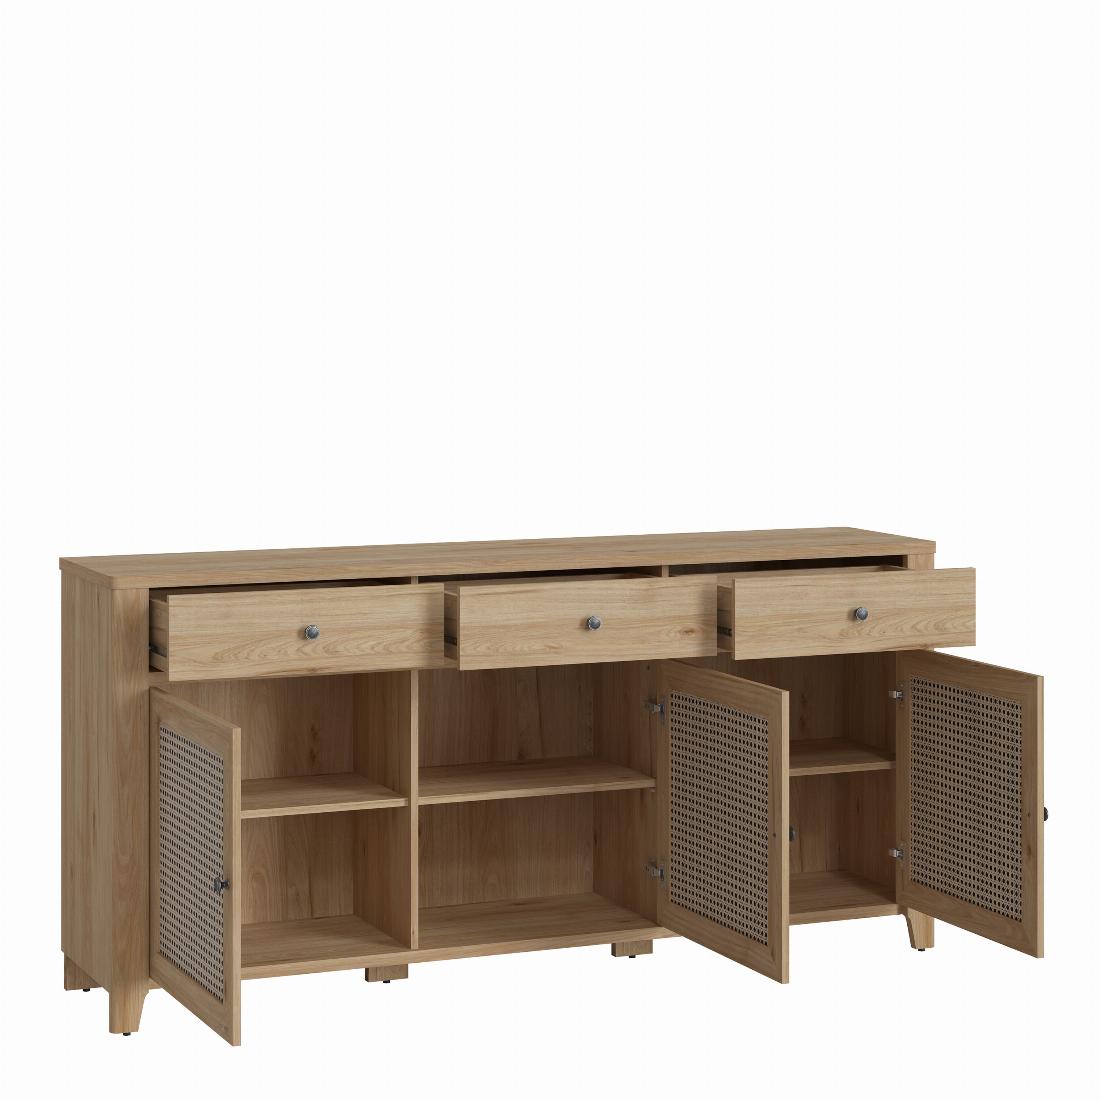 Cestino 3 Door 3 Drawer Sideboard in Jackson Hickory Oak and Rattan Effects